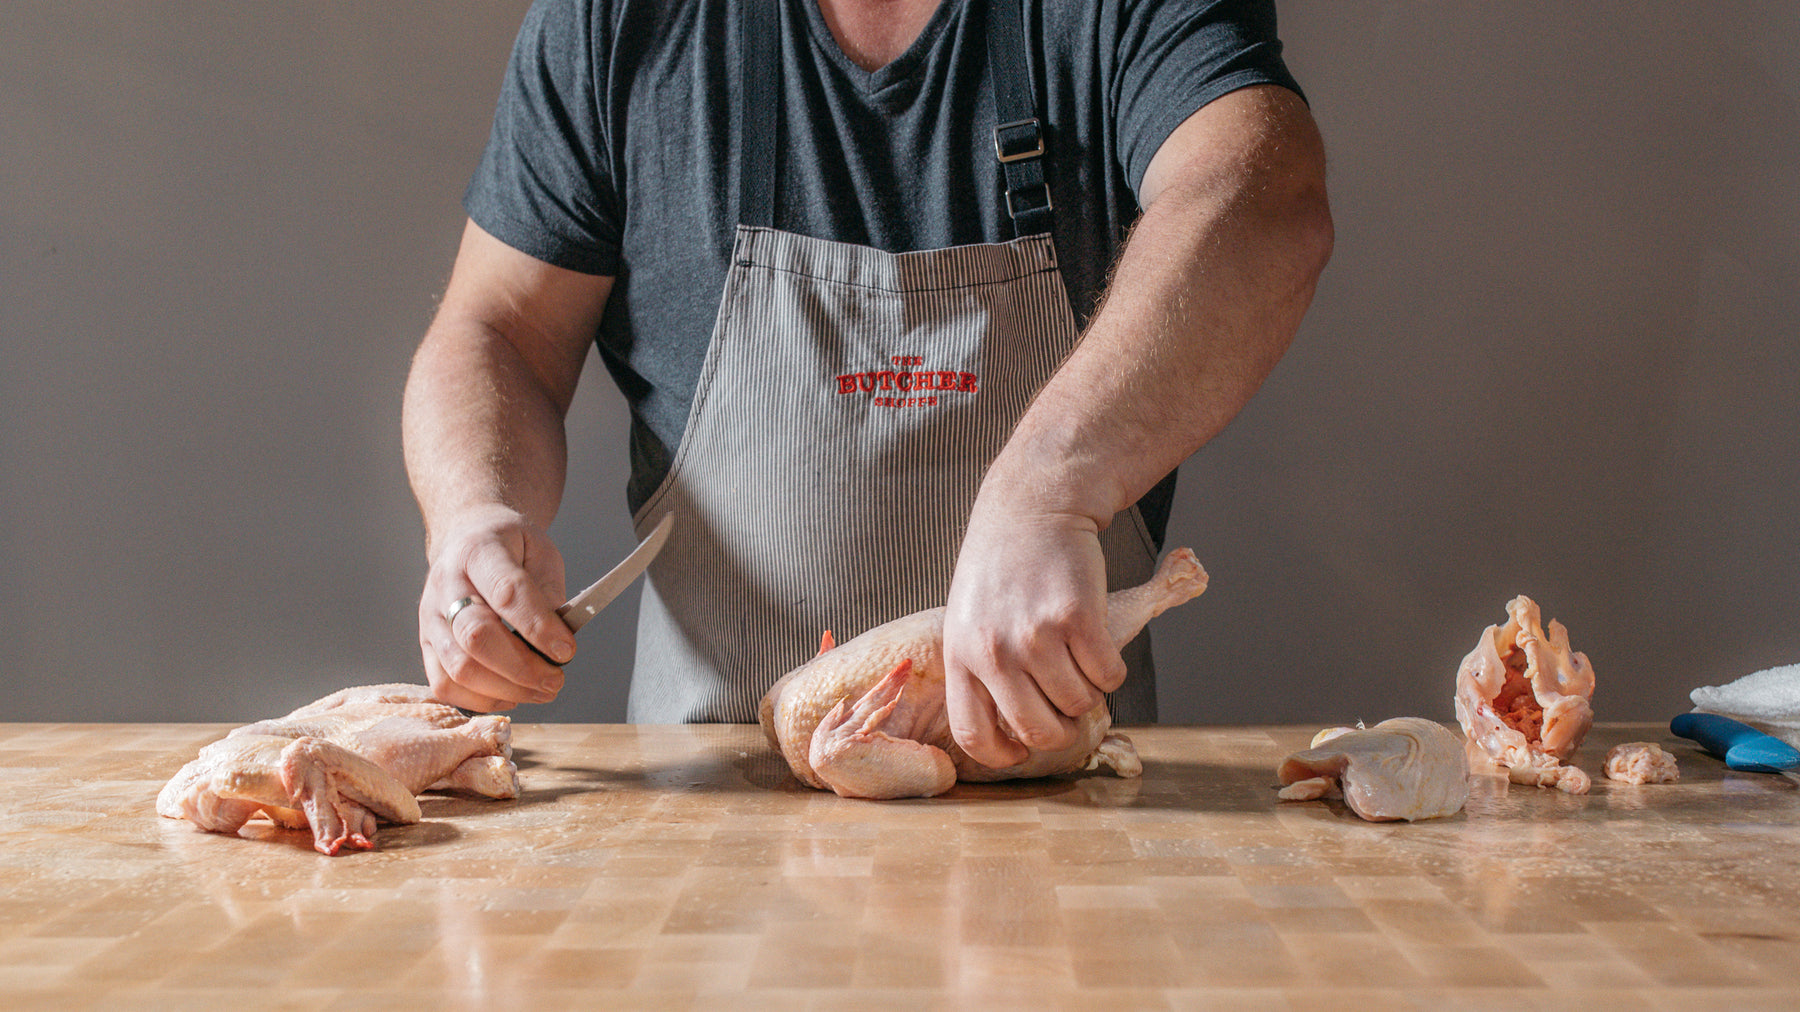 The Art of Butchery at The Butcher Shoppe - BellwetherX: Showcasing the skilled craftsmanship and expertise in meat preparation and presentation.